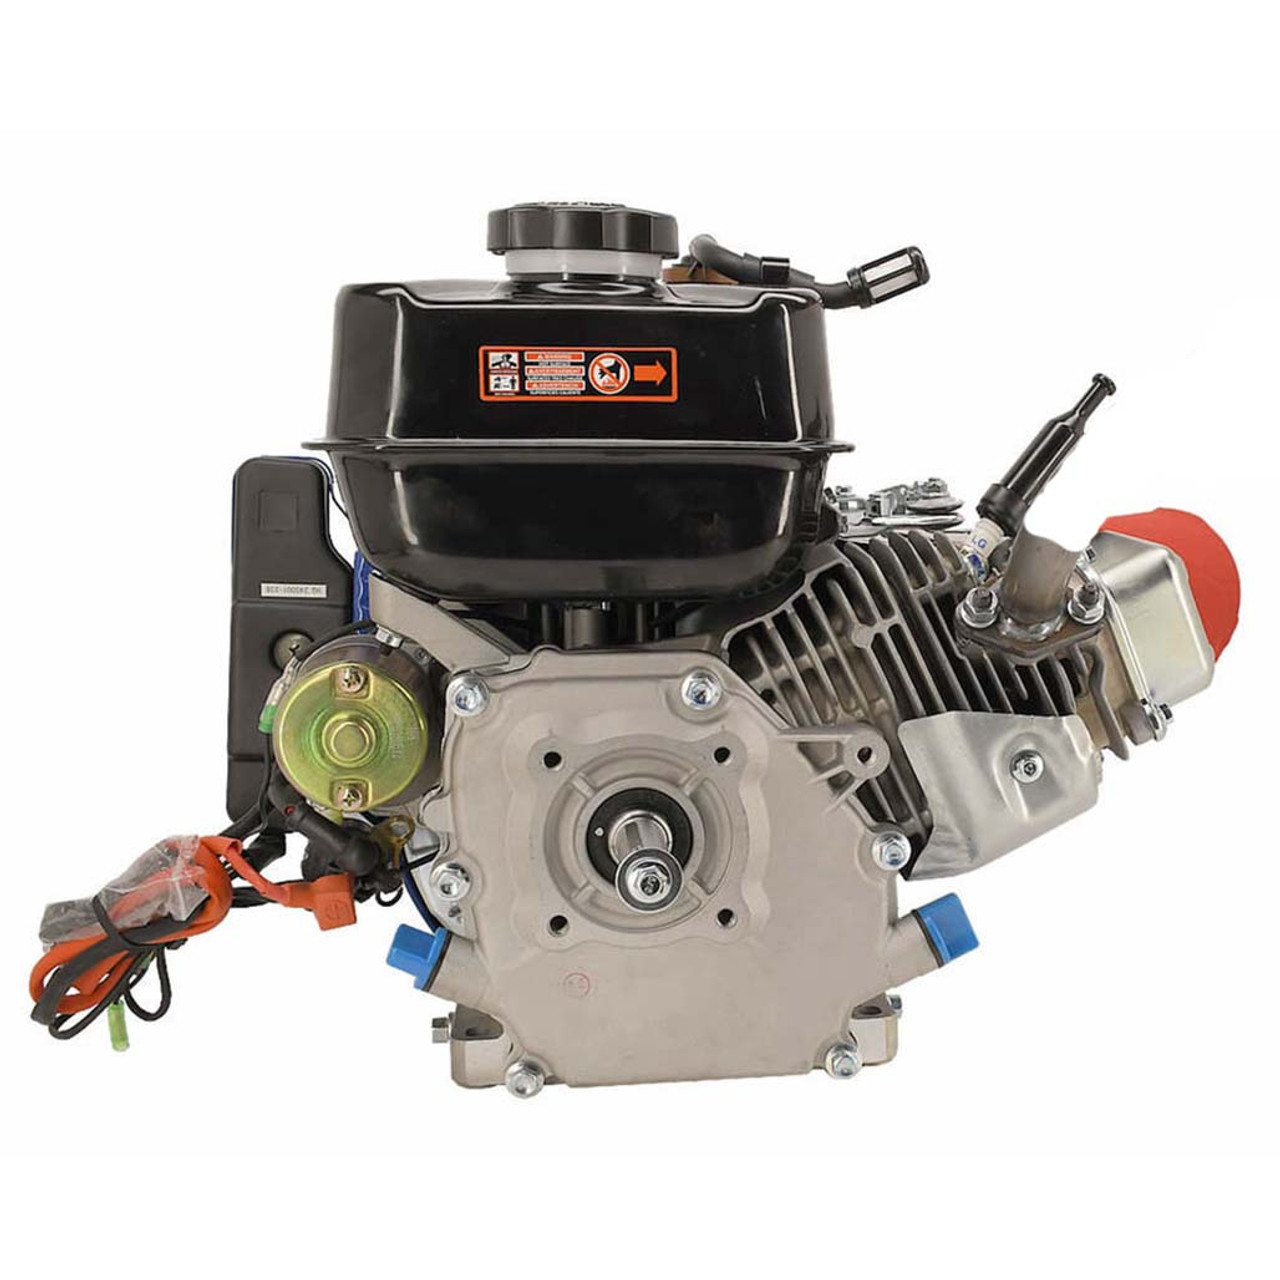 Stage 1 Tillotson 212cc Performance Racing Engine, Electric Start